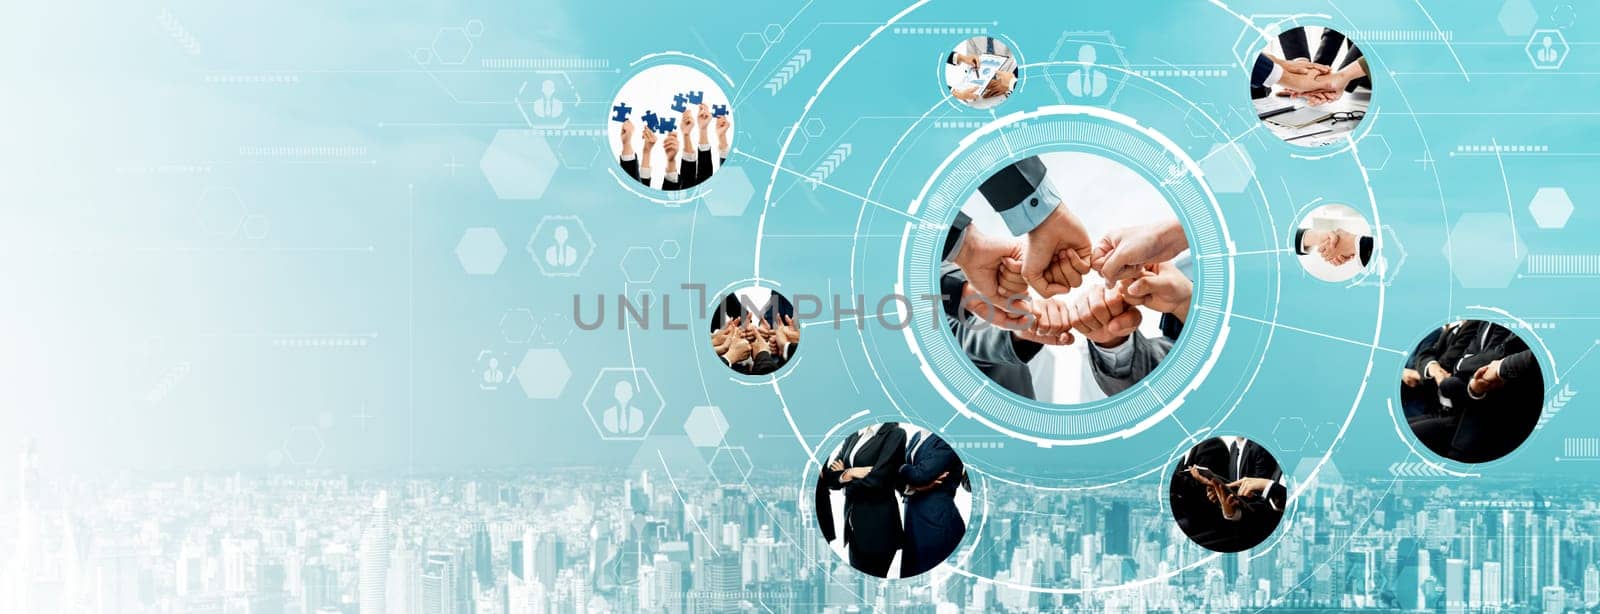 Teamwork and human resources HR management technology concept in corporate business with people group networking to support partnership, trust, teamwork and unity of coworkers in office vexel